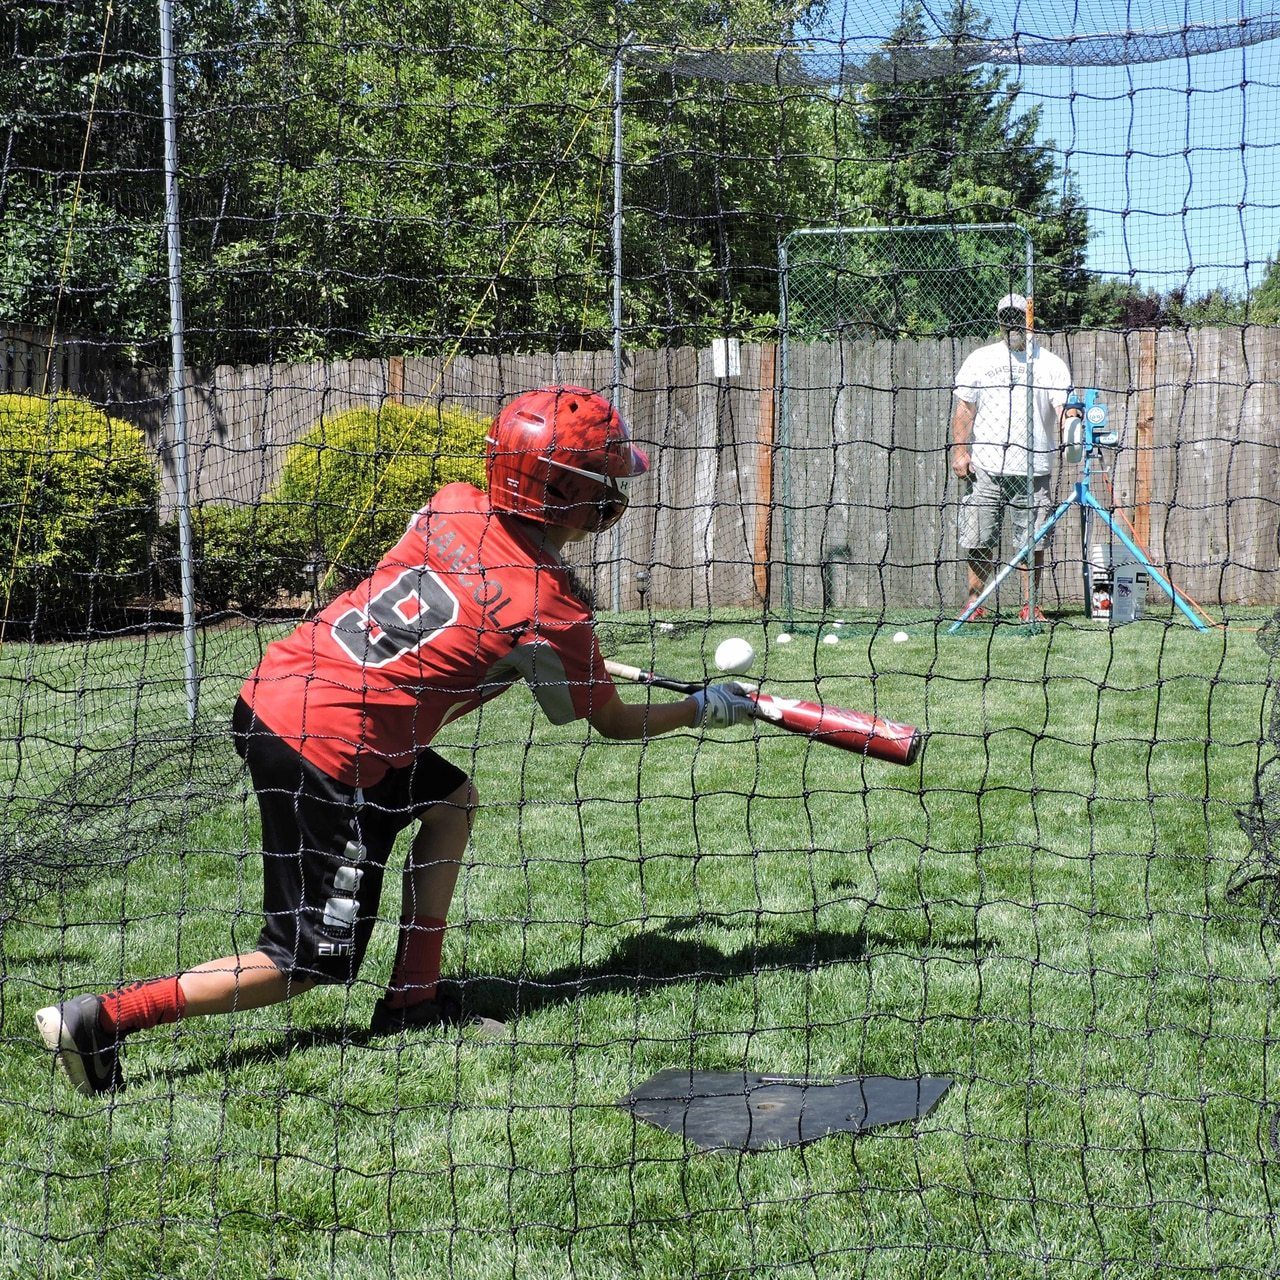 Jugs Hit at Home Complete Backyard Batting Cage Close Up View with Batter